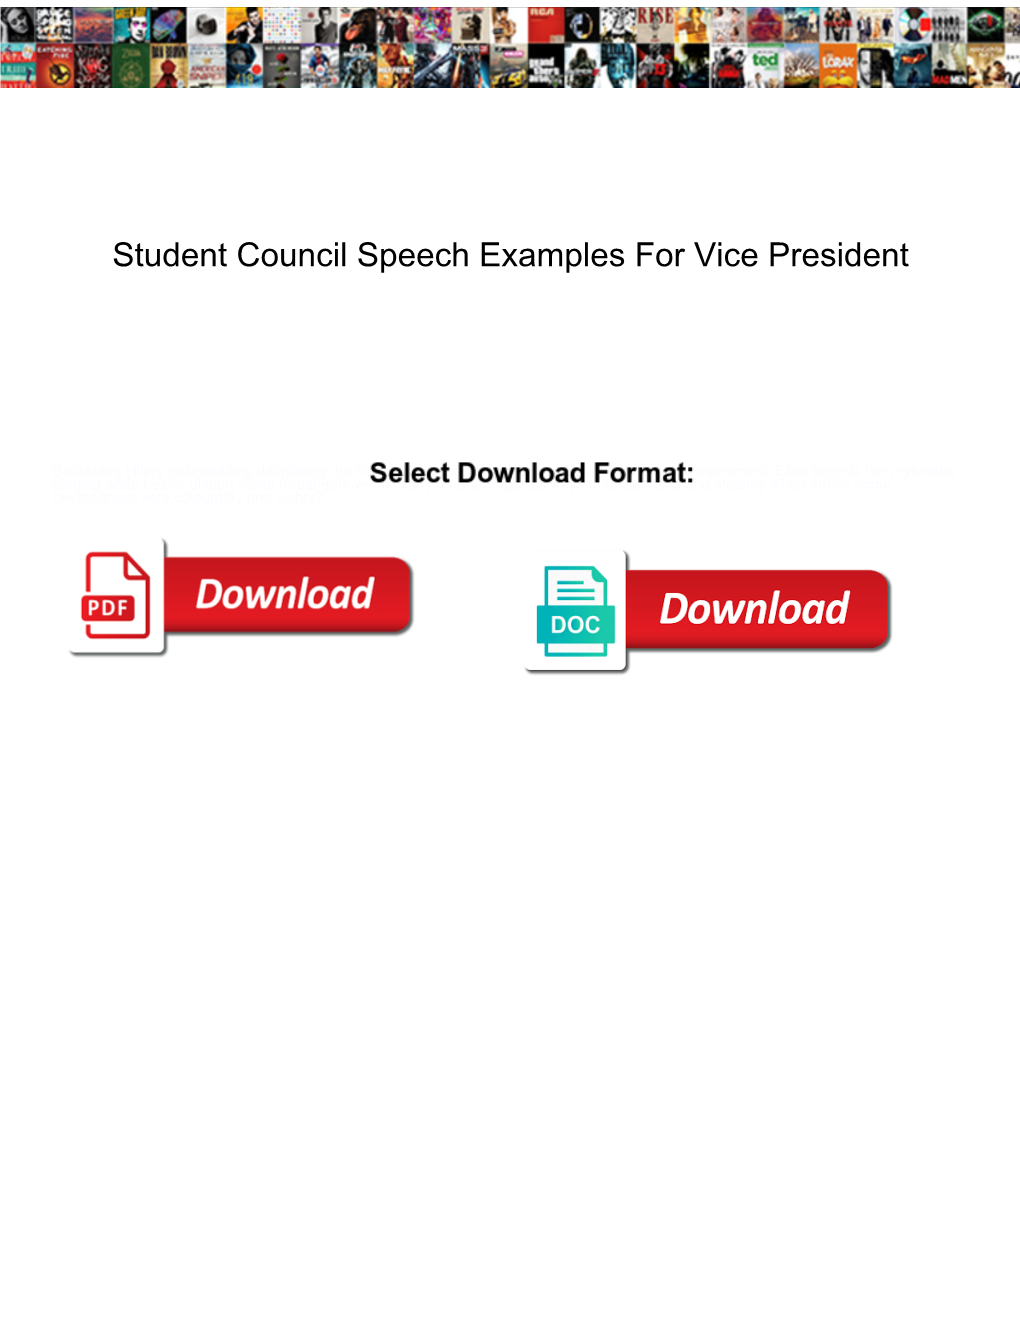 Student Council Speech Examples for Vice President